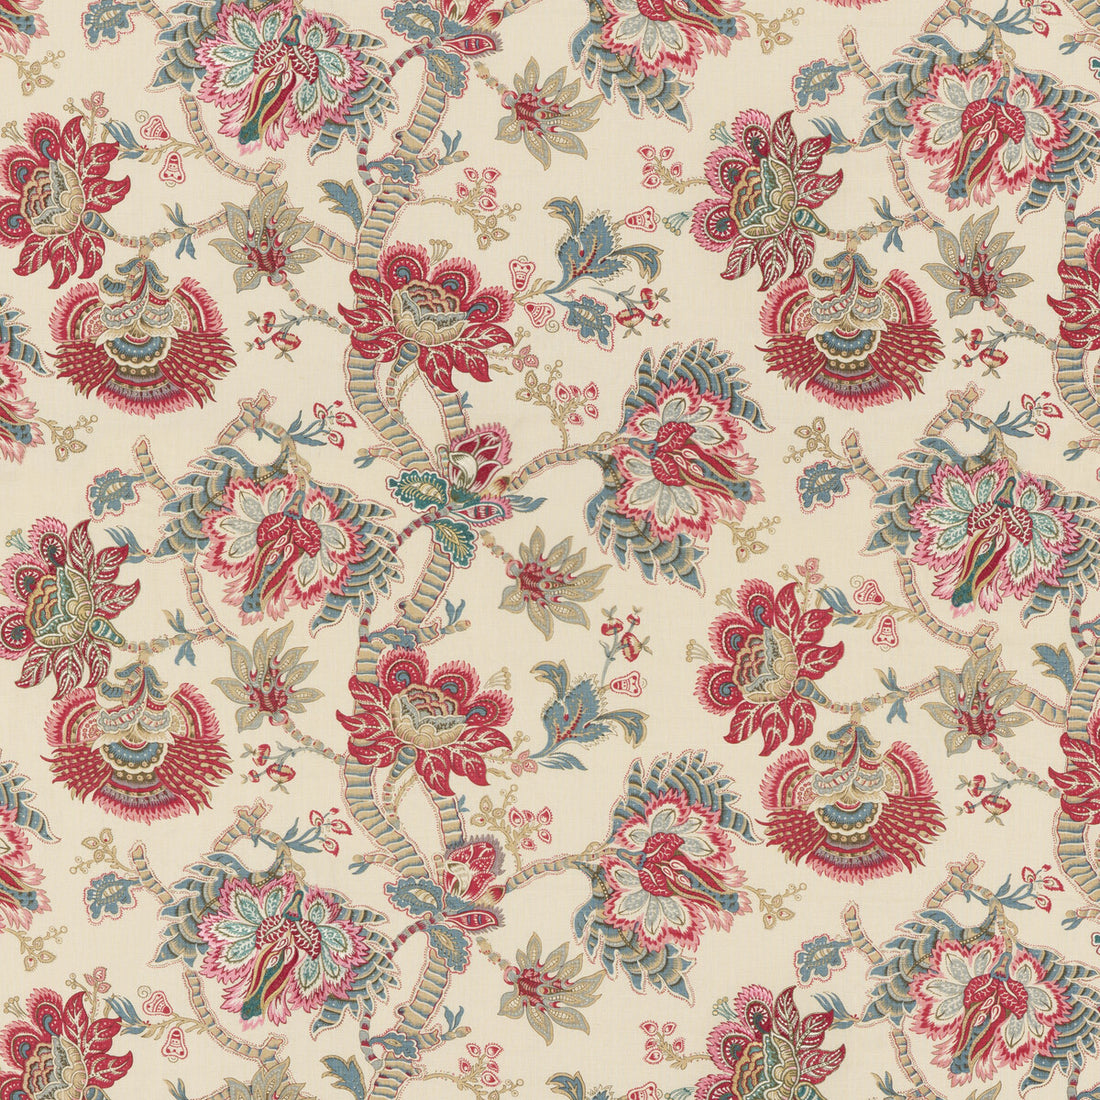 Kingham fabric in red/ blue color - pattern BP10903.1.0 - by G P &amp; J Baker in the Portobello collection